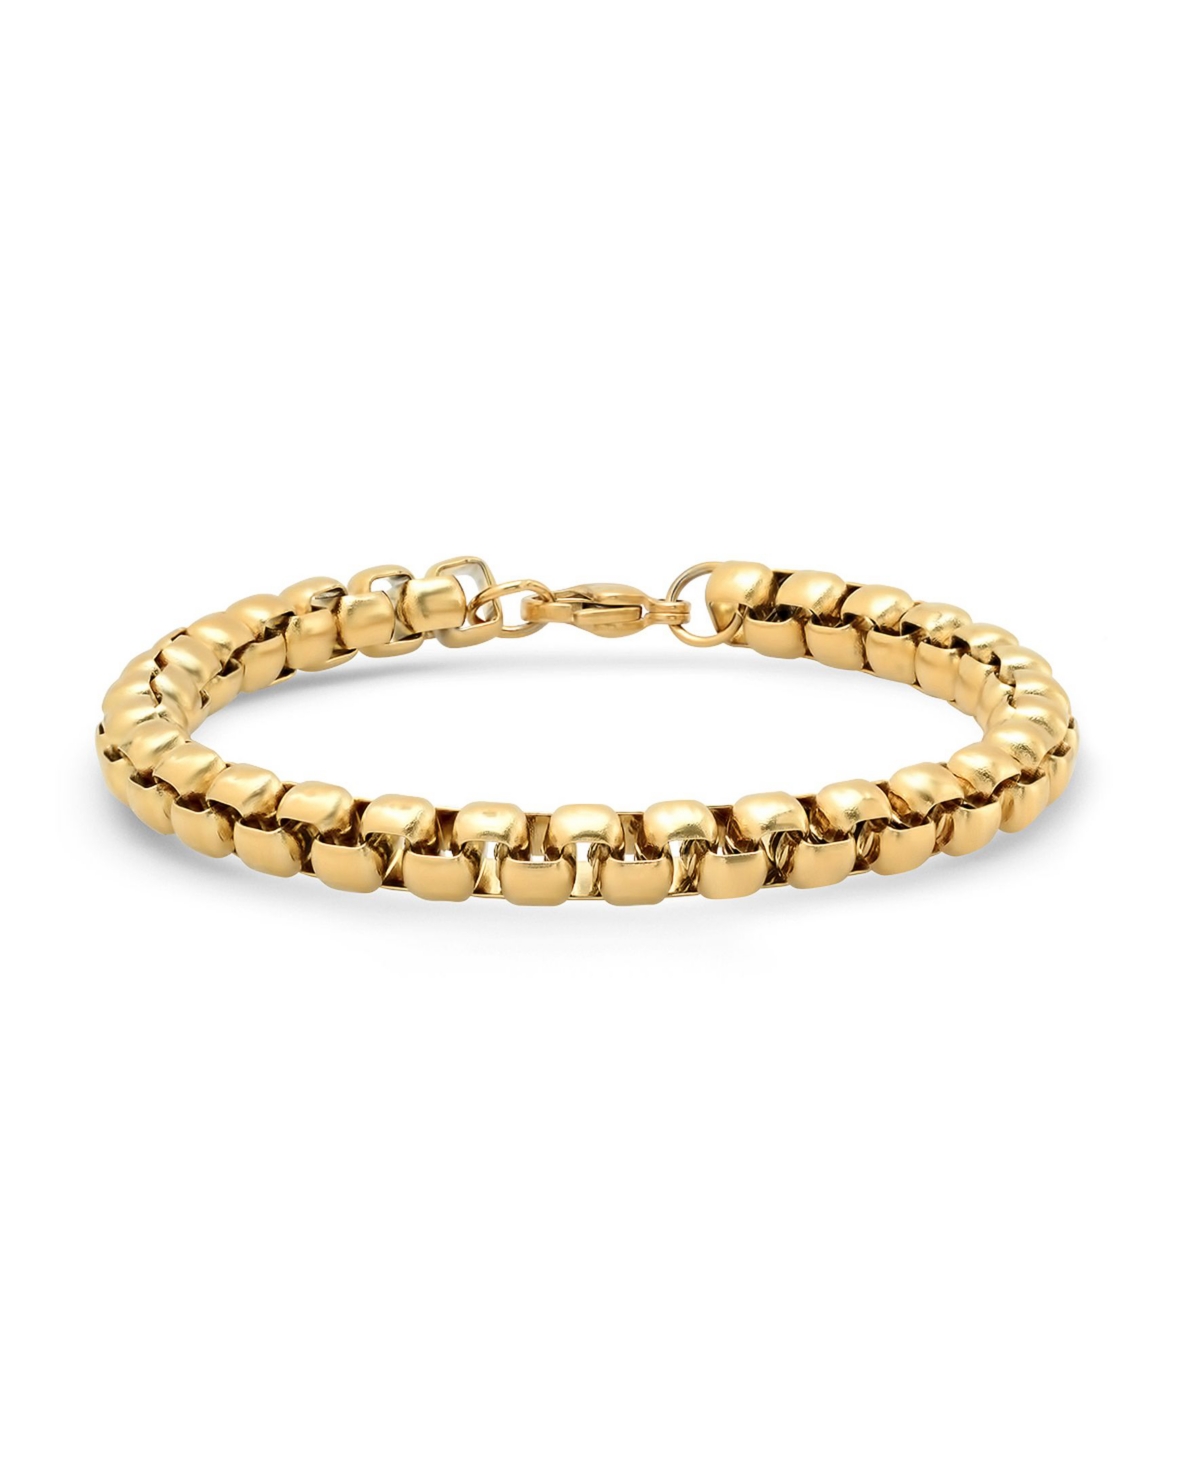 Men's 18K Gold Plated Stainless Steel Thick Round Box Link Bracelet - Gold